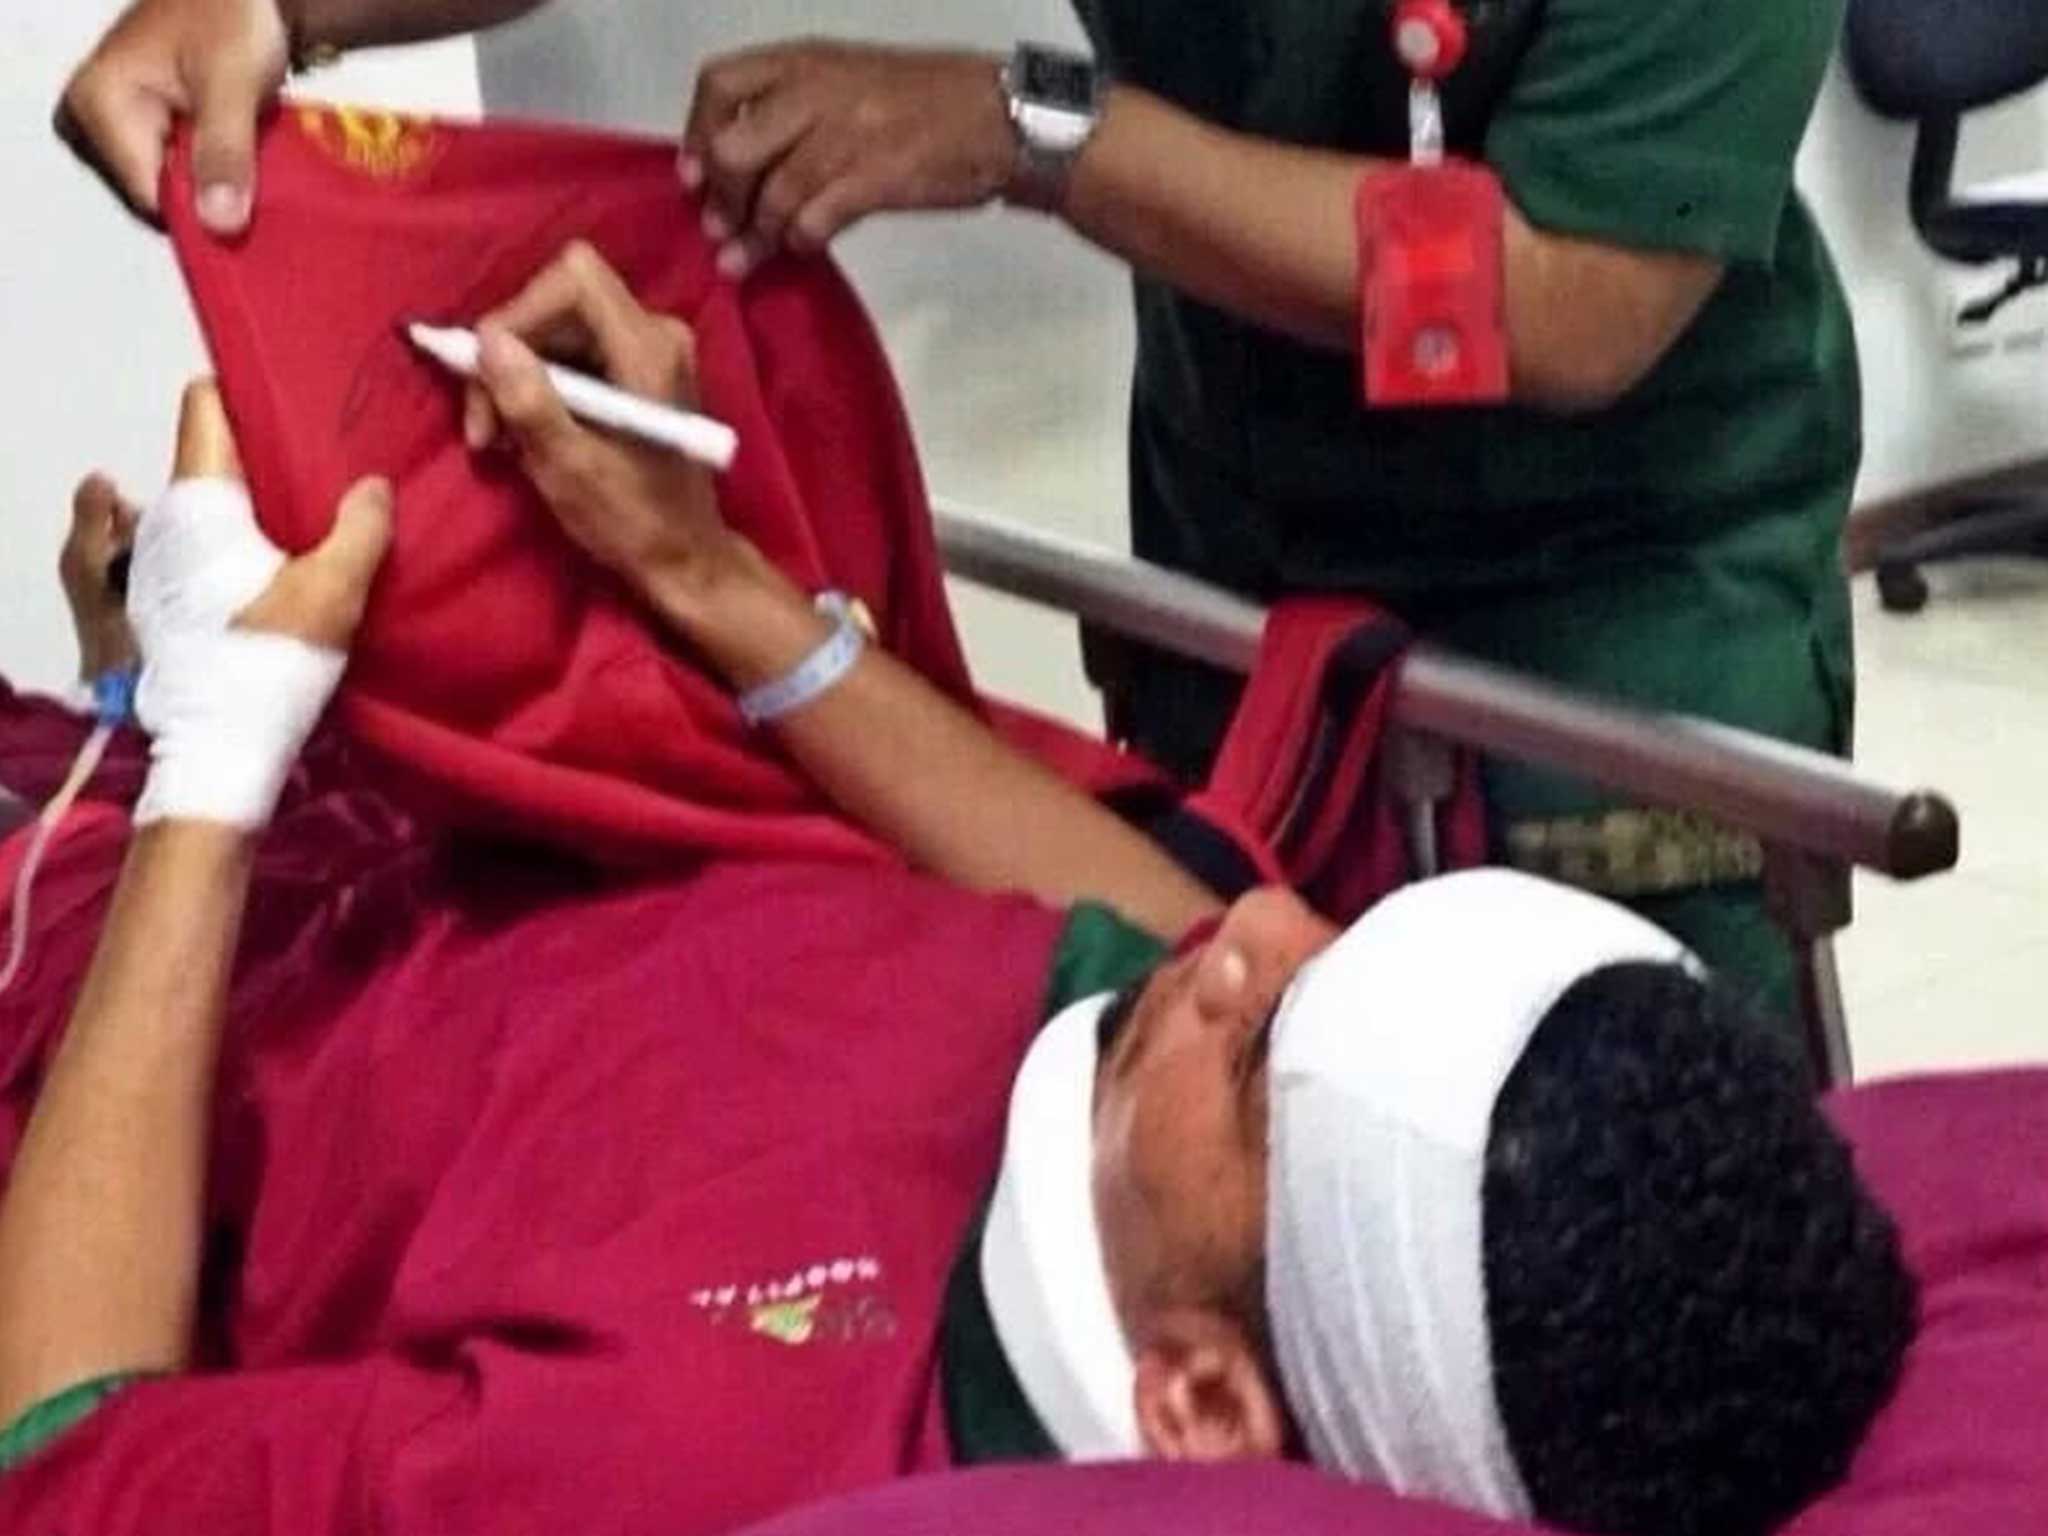 Chris Smalling, it is alleged, is pictured with a neck brace on and a bandage around his head